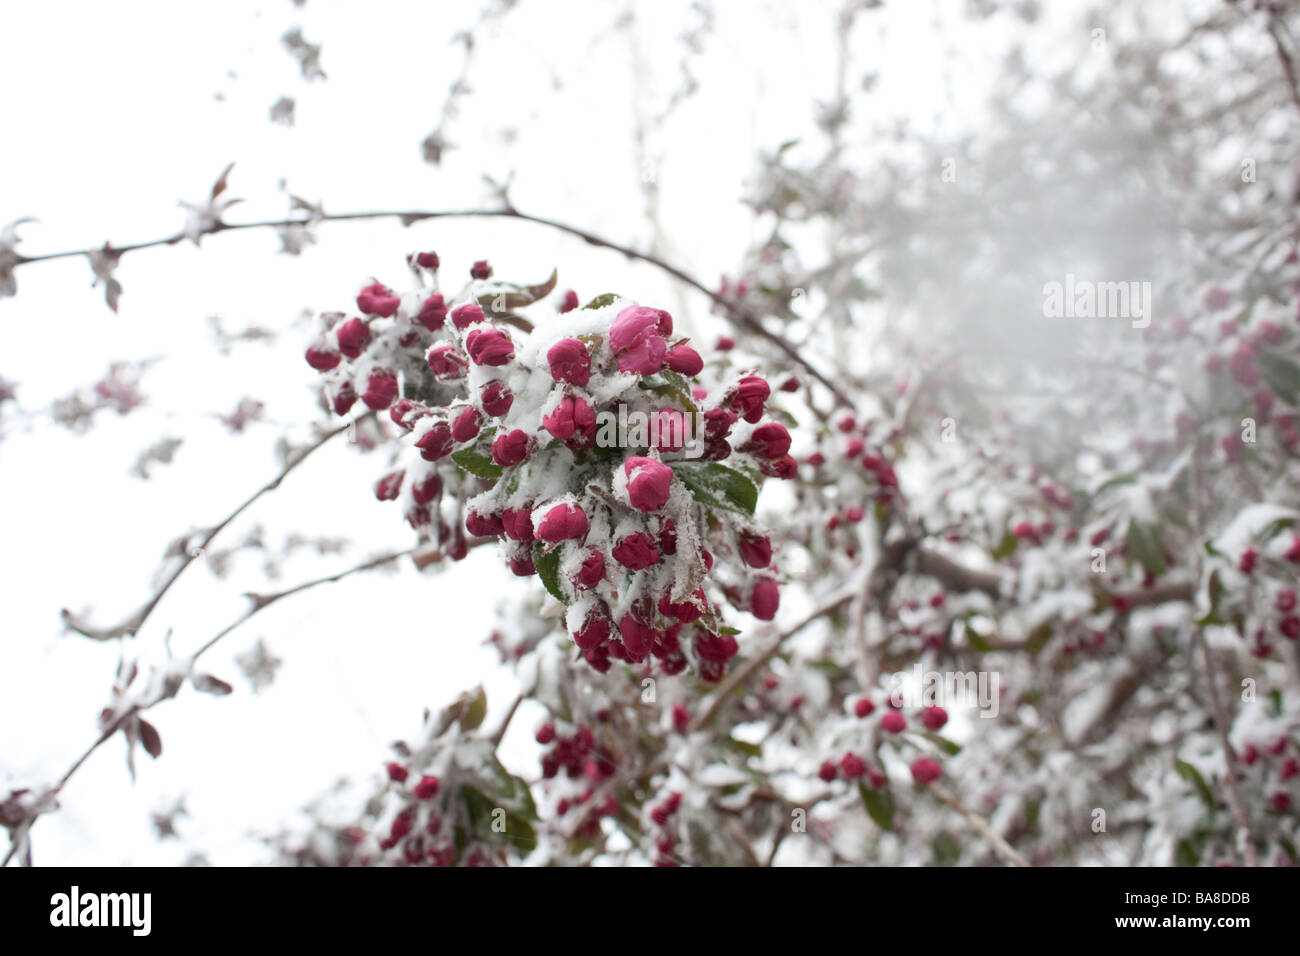 A closeup photo of Crabapple blossoms covered in snow Stock Photo